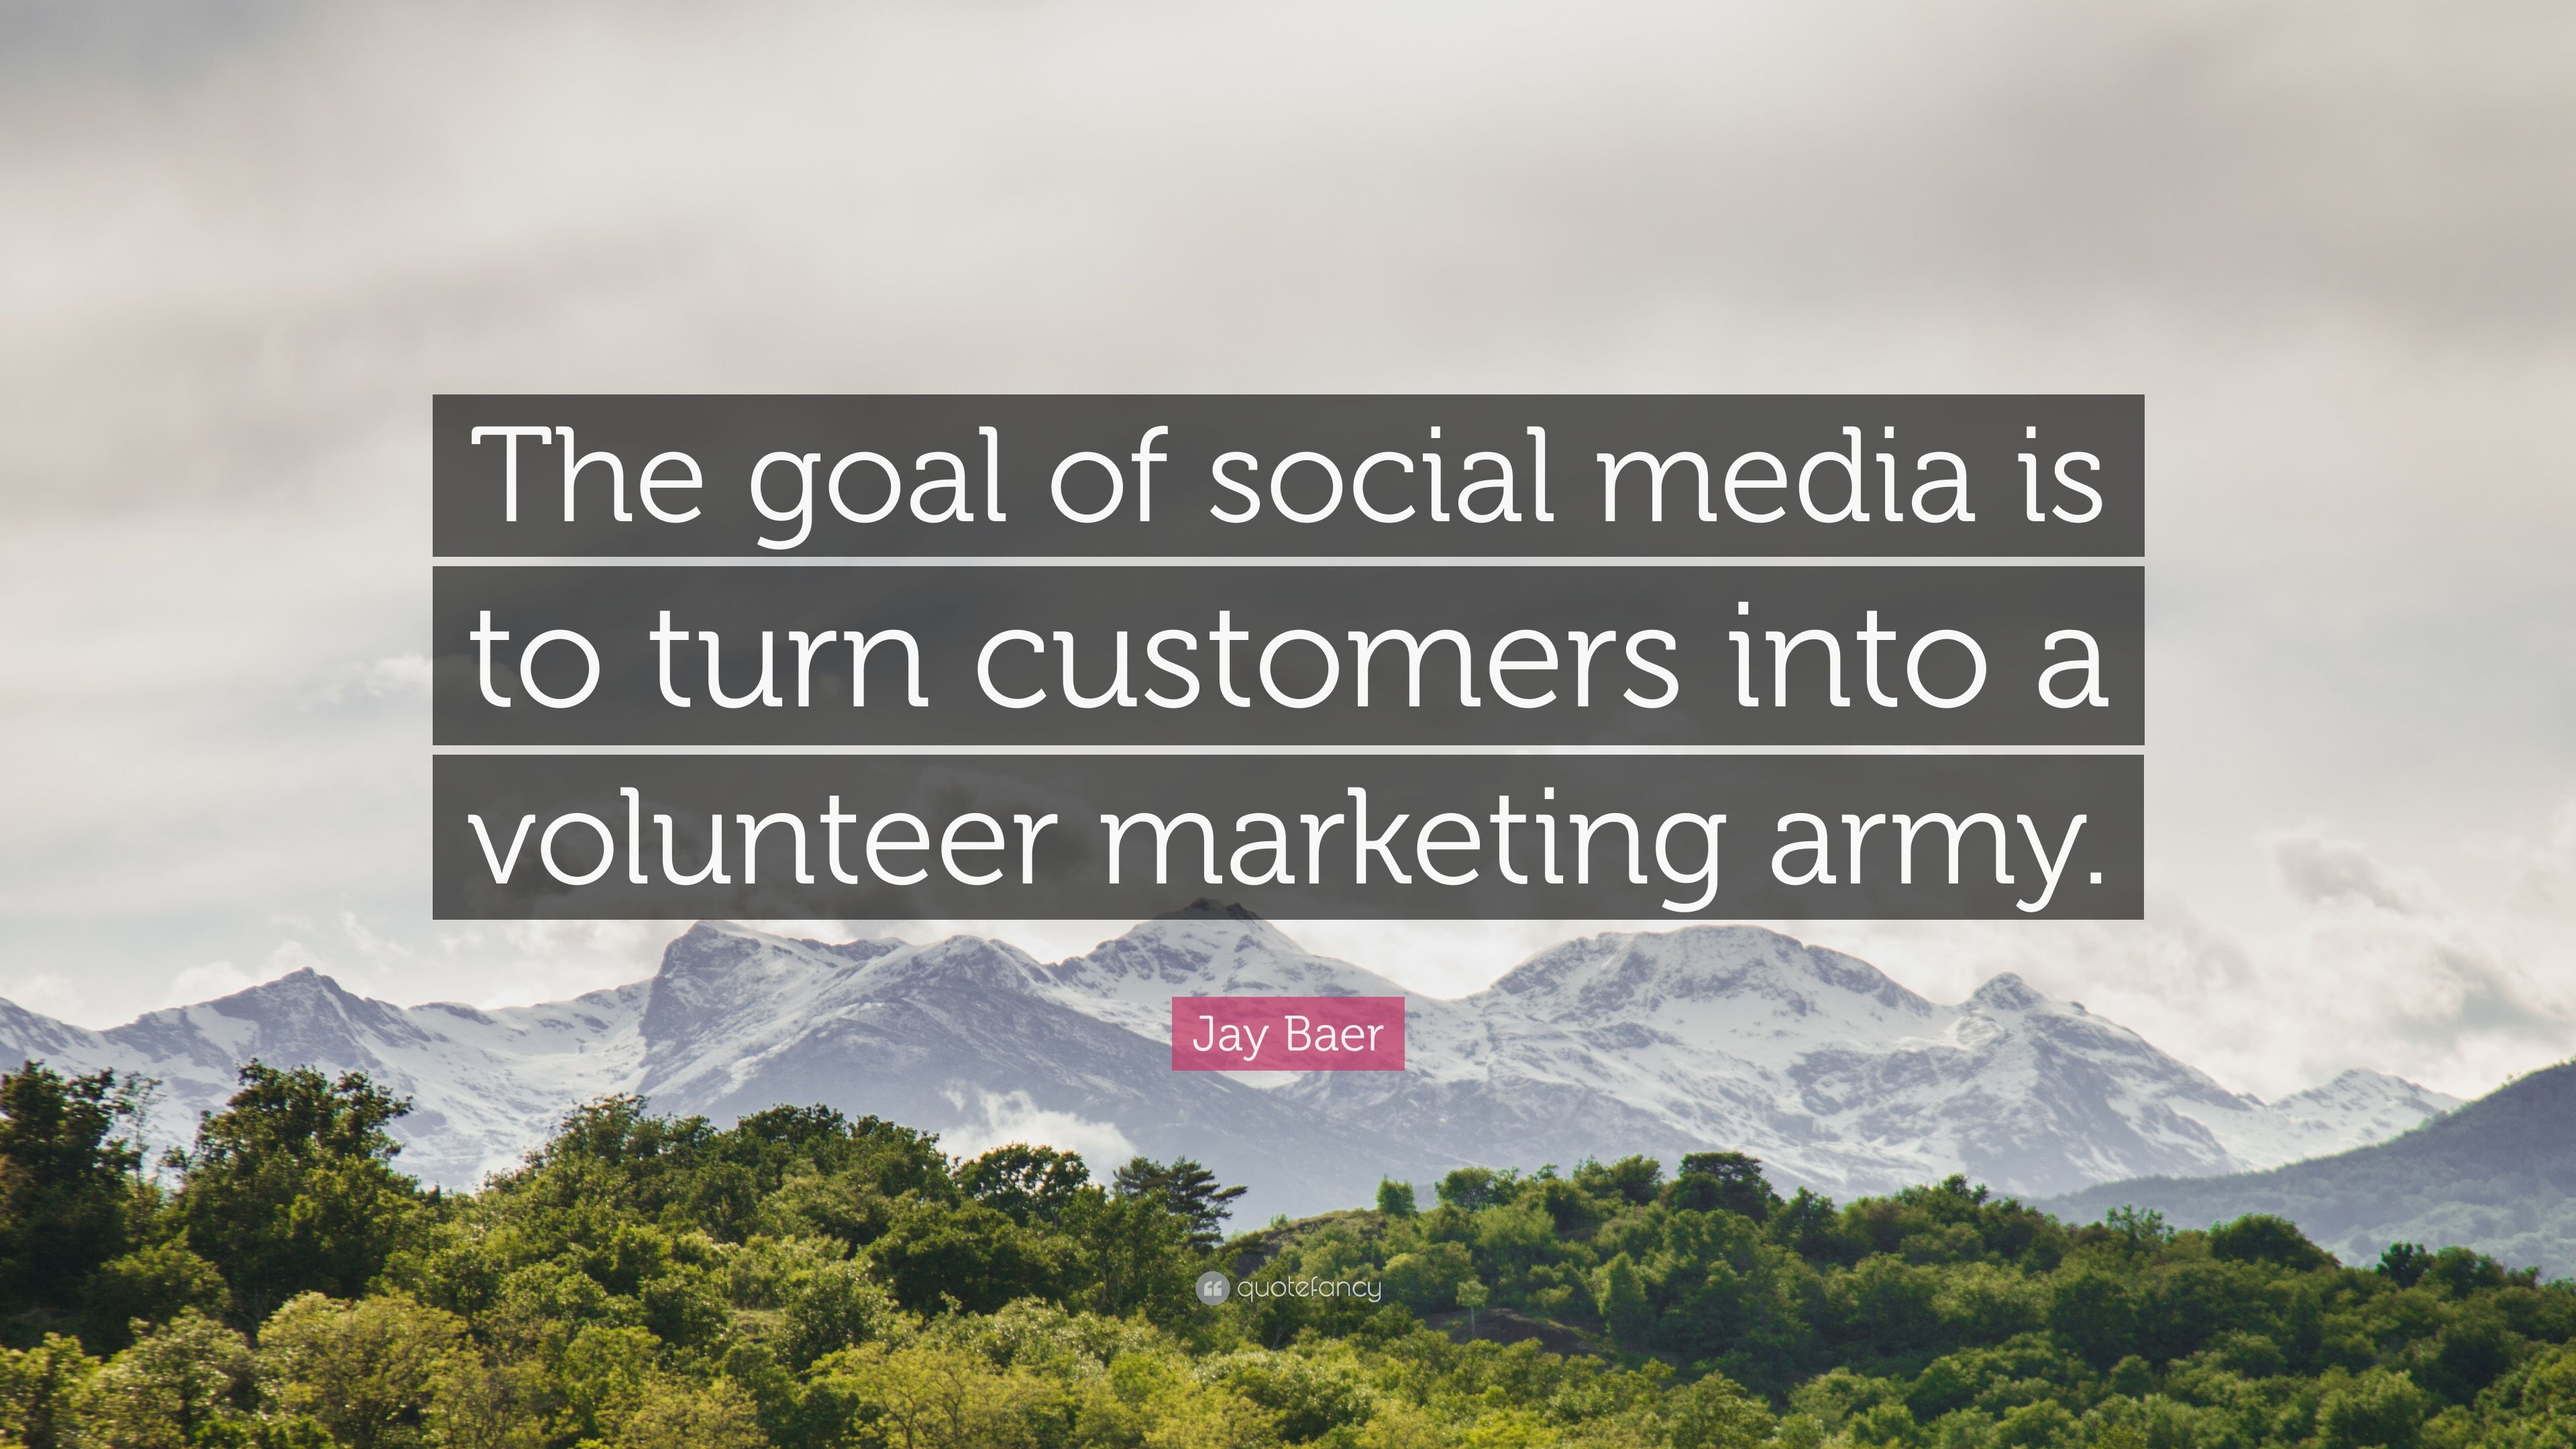 Jay Baer Quote: “The goal of social media is to turn customers